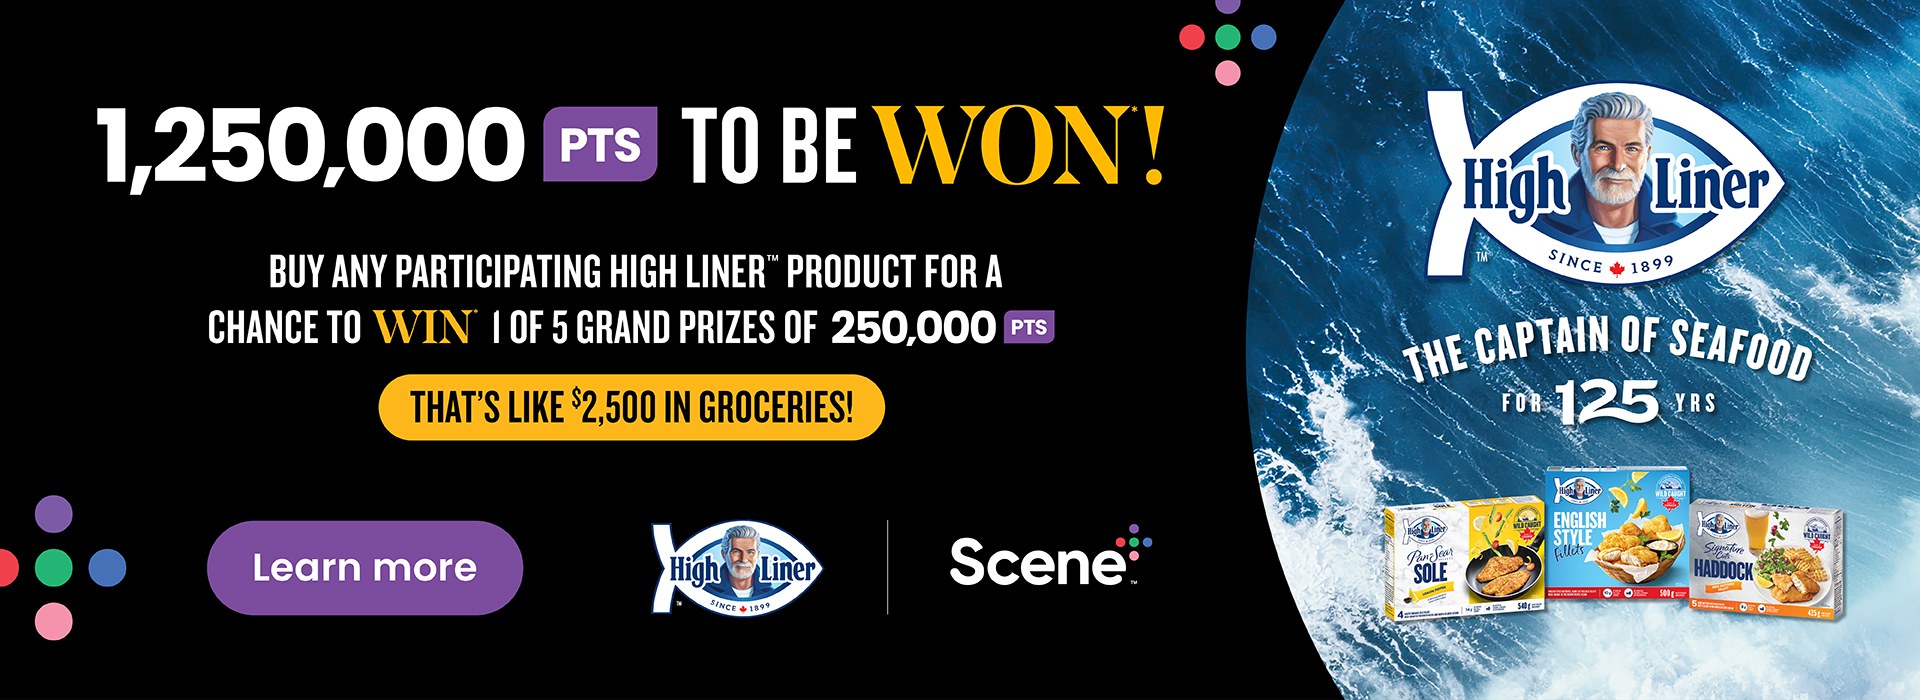 The following image contains the text, "1,250,000 PTS TO BE WON! Buy any participating high-liner product for a chance to win 1 of 5 grand prizes of 250,000 PTS. That's like $2,500 in Groceries! Along with the learn more button with a High liner and scene plus logos."